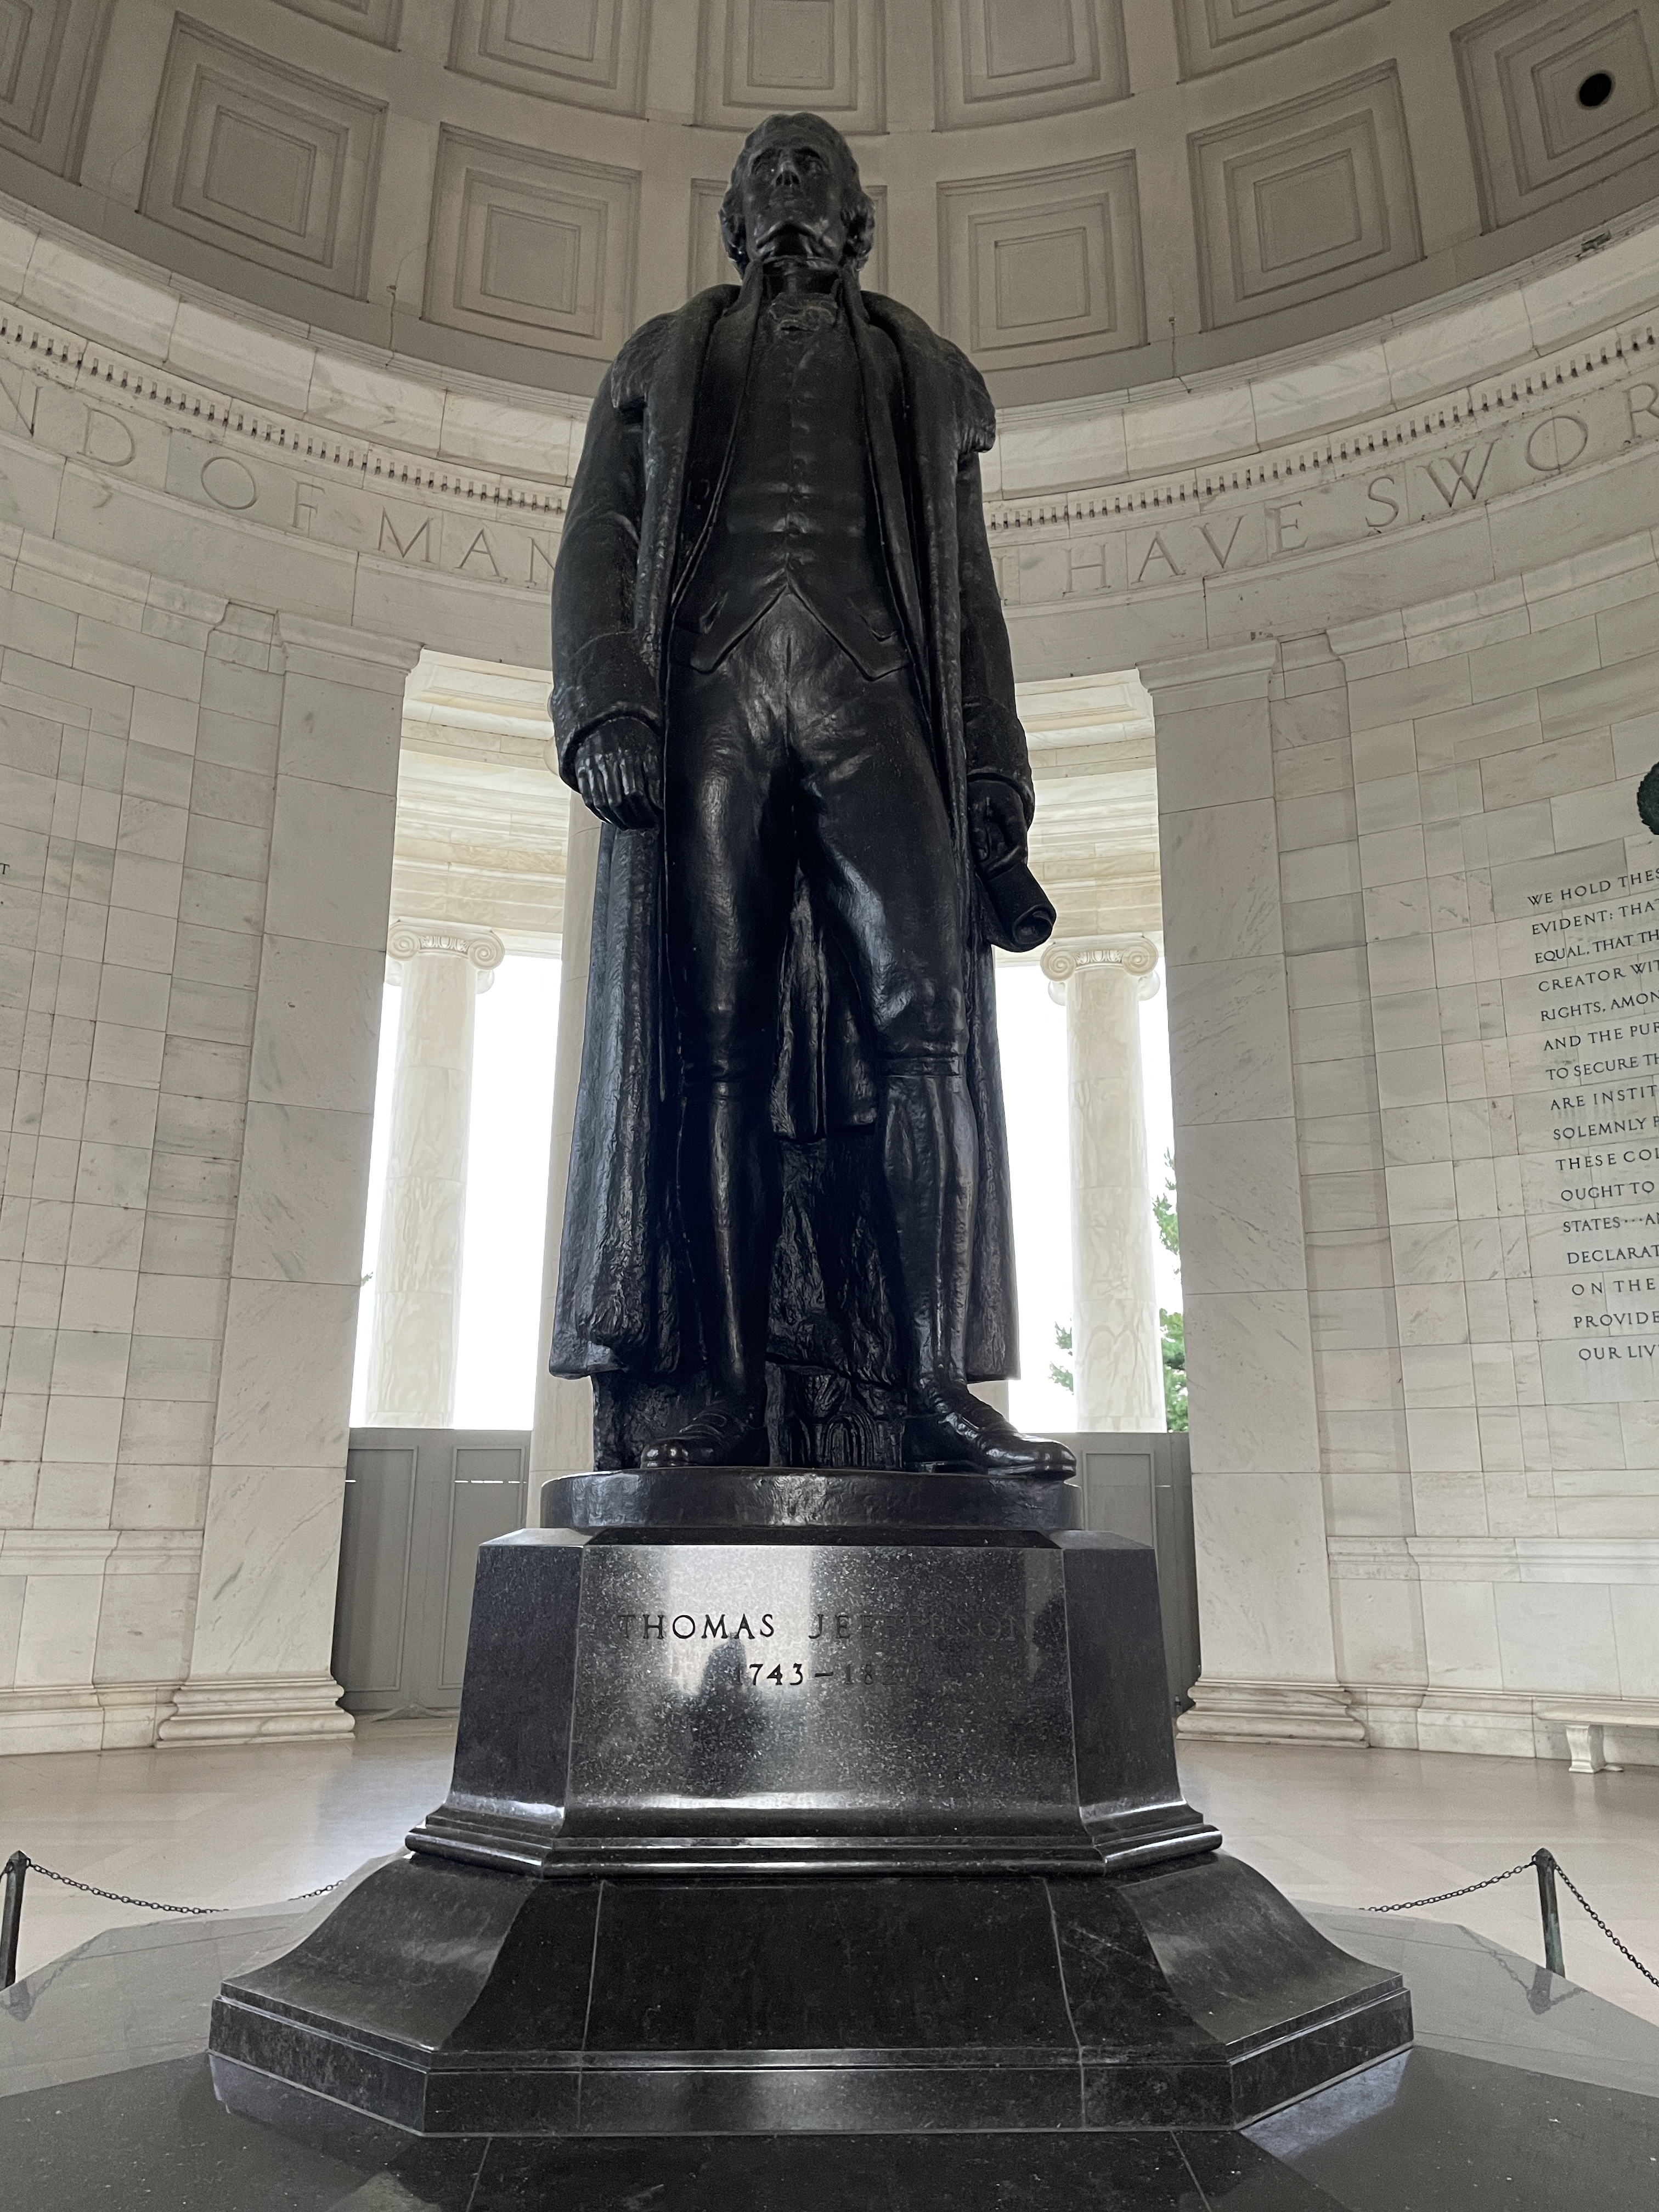 Statue in the Thomas Jefferson Memorial in the National Mall in Washington, D.C.